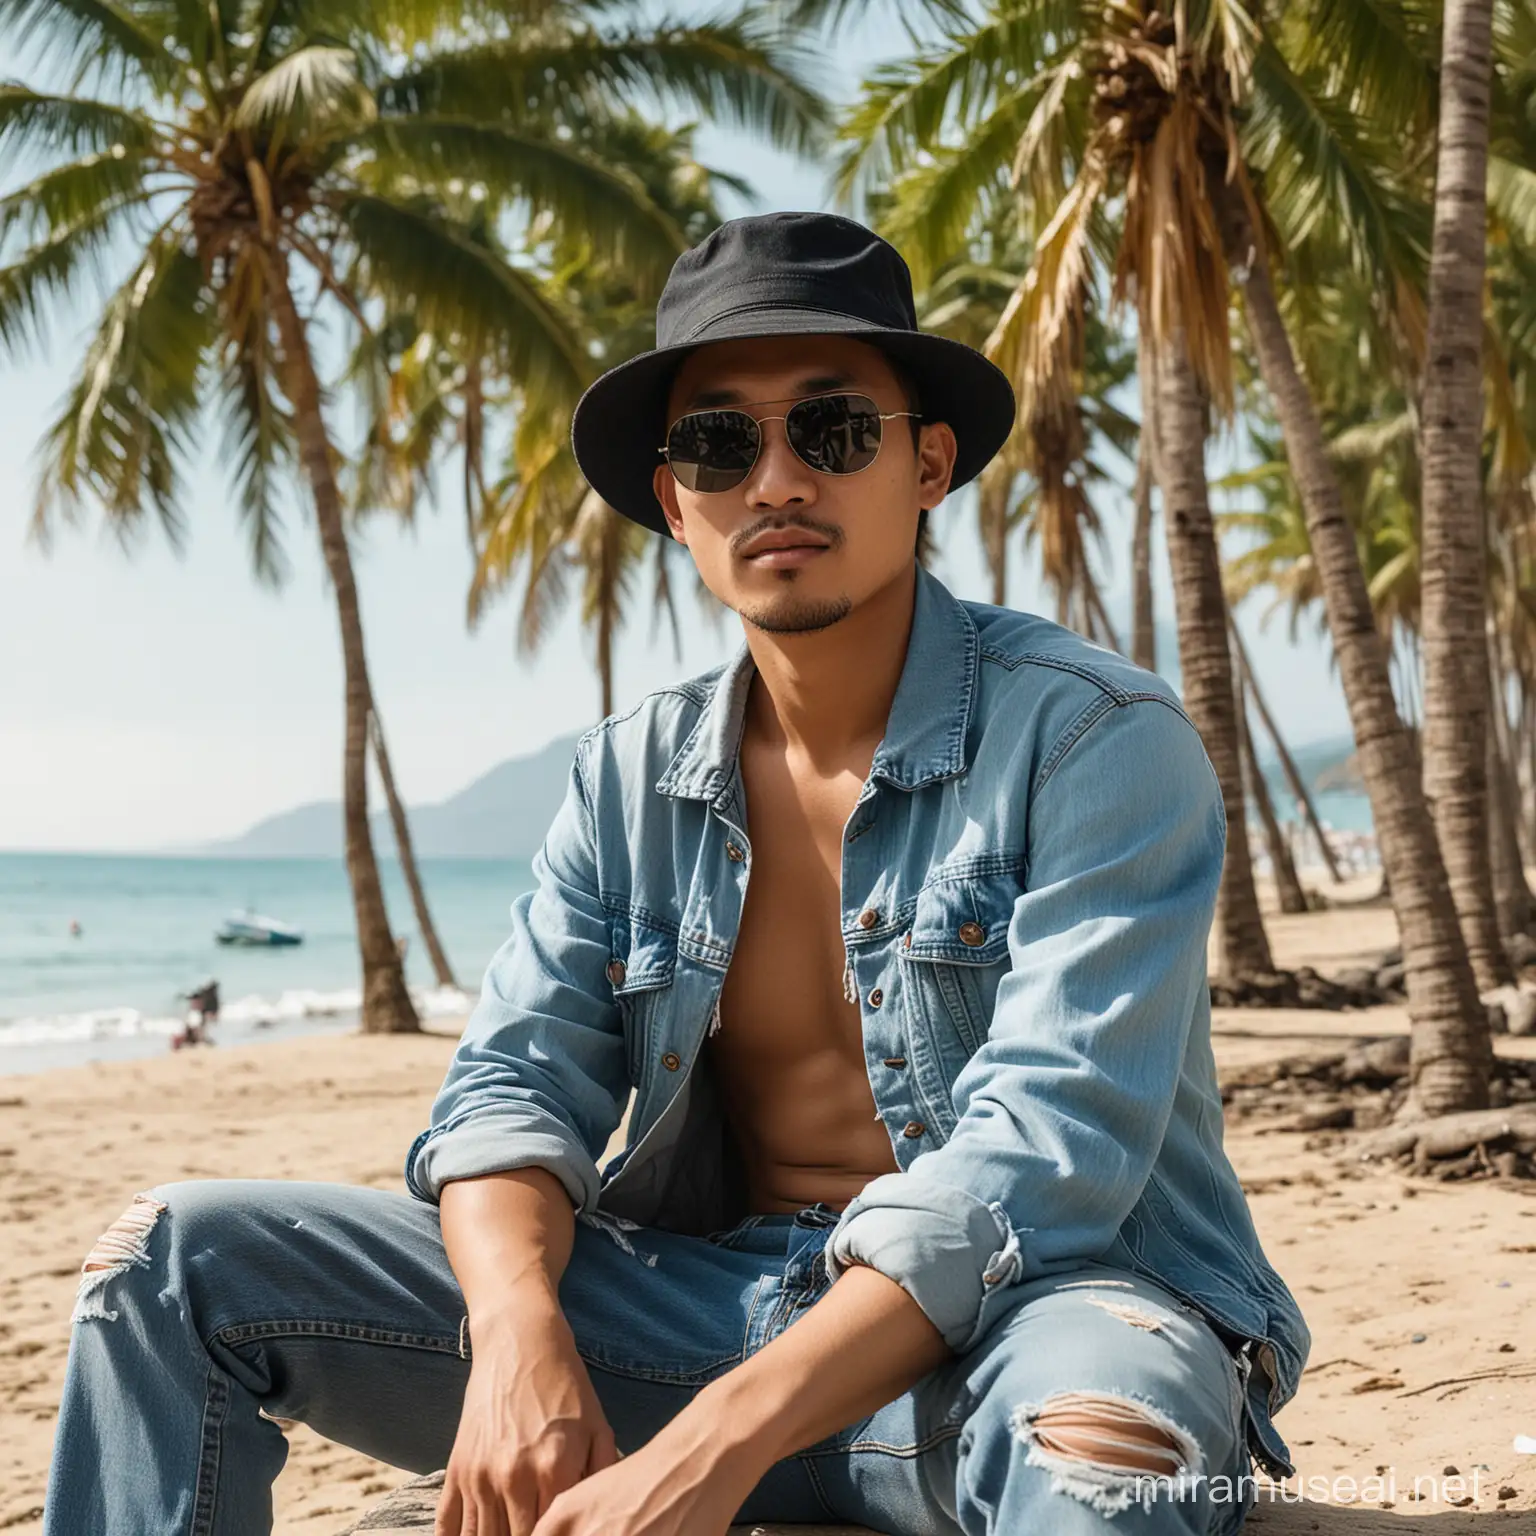 Asian Man Relaxing by Beach with Coconut Trees in HighResolution Daytime Shot